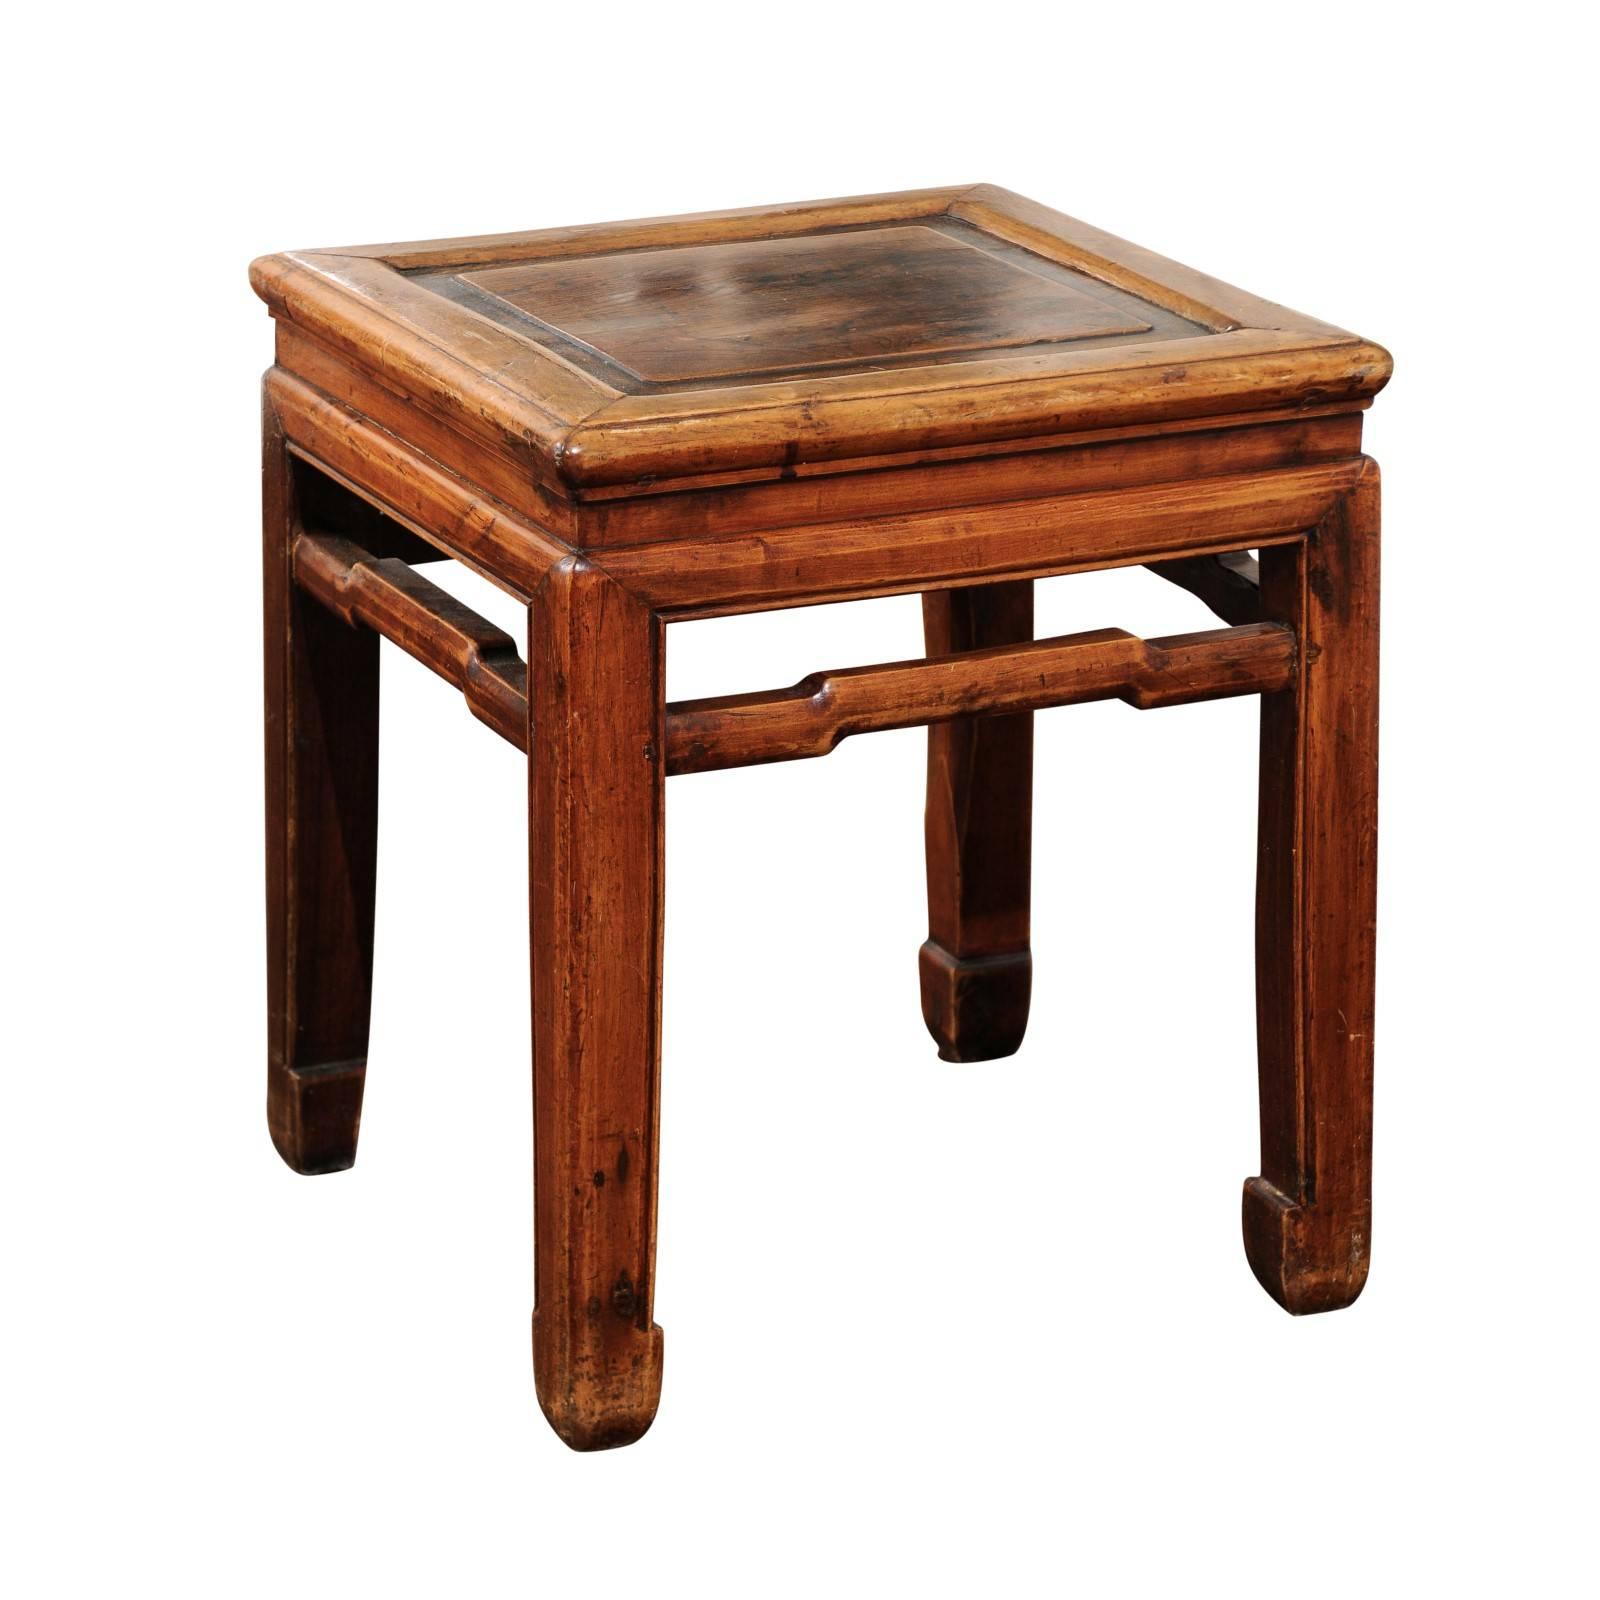 Qing Dynasty Stool or Low Table